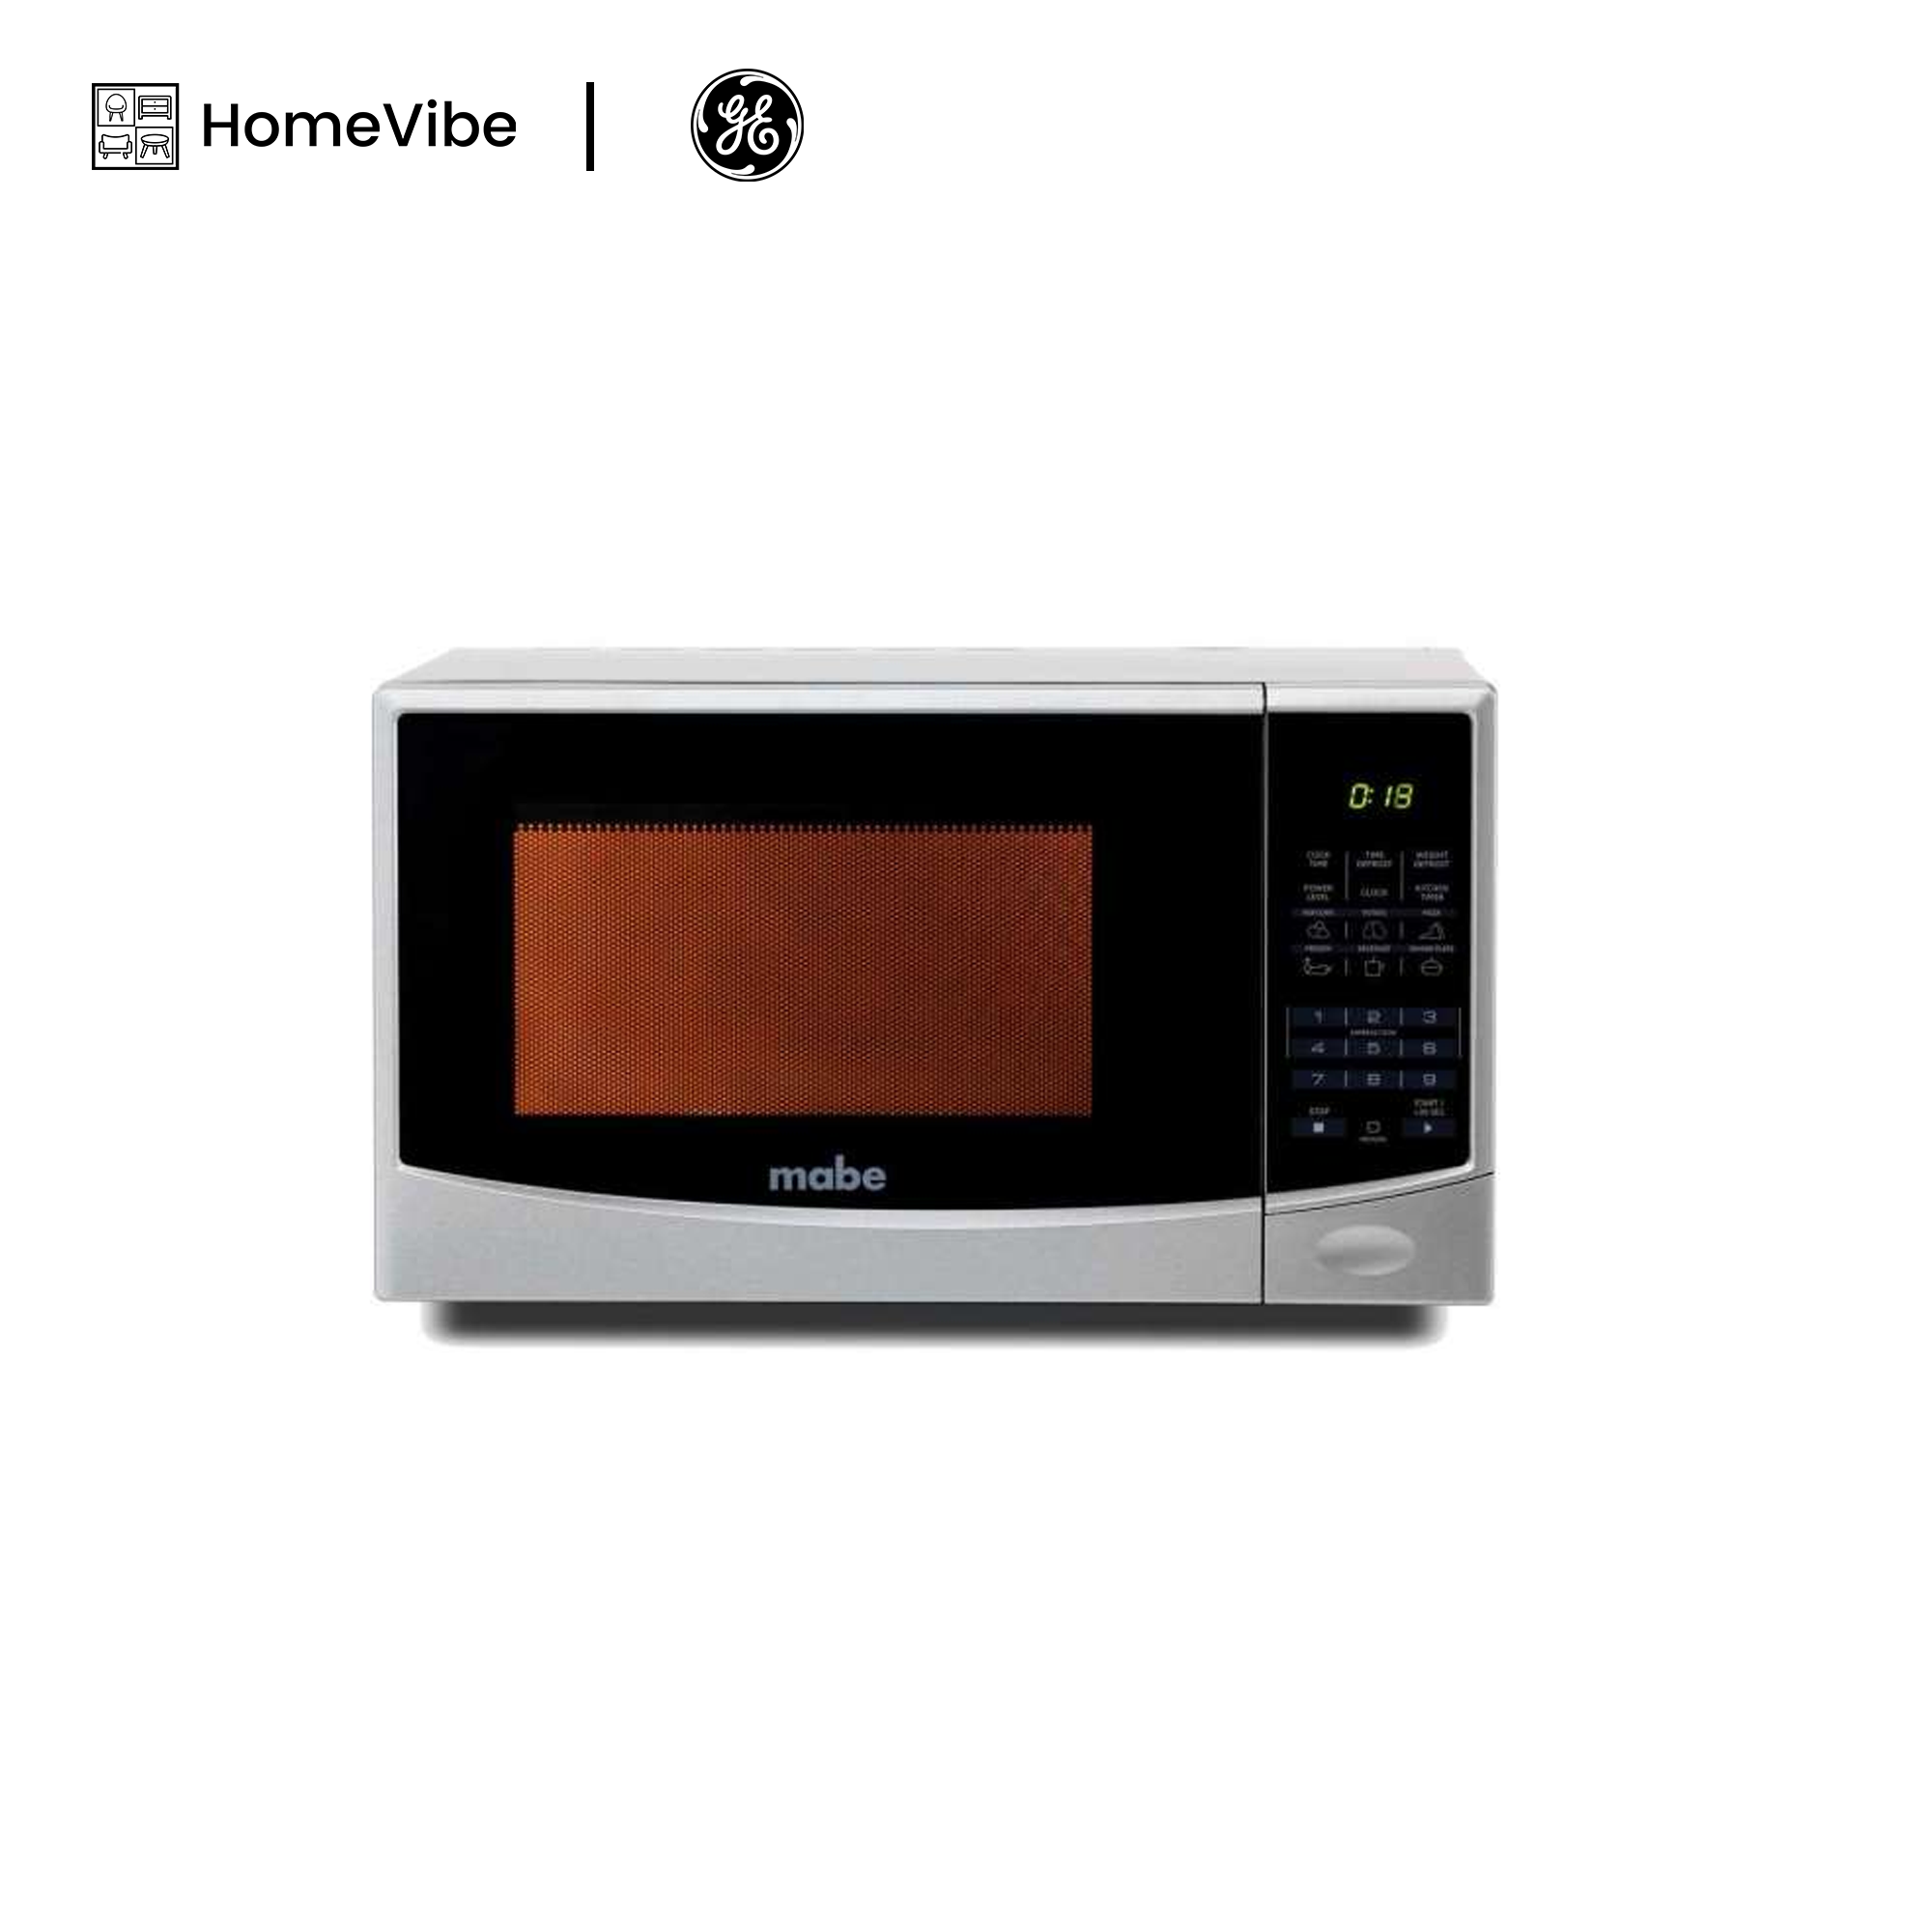 Mabe 23L / 0.81 cuft Capacity Countertop Microwave Oven MEI2340DVSL